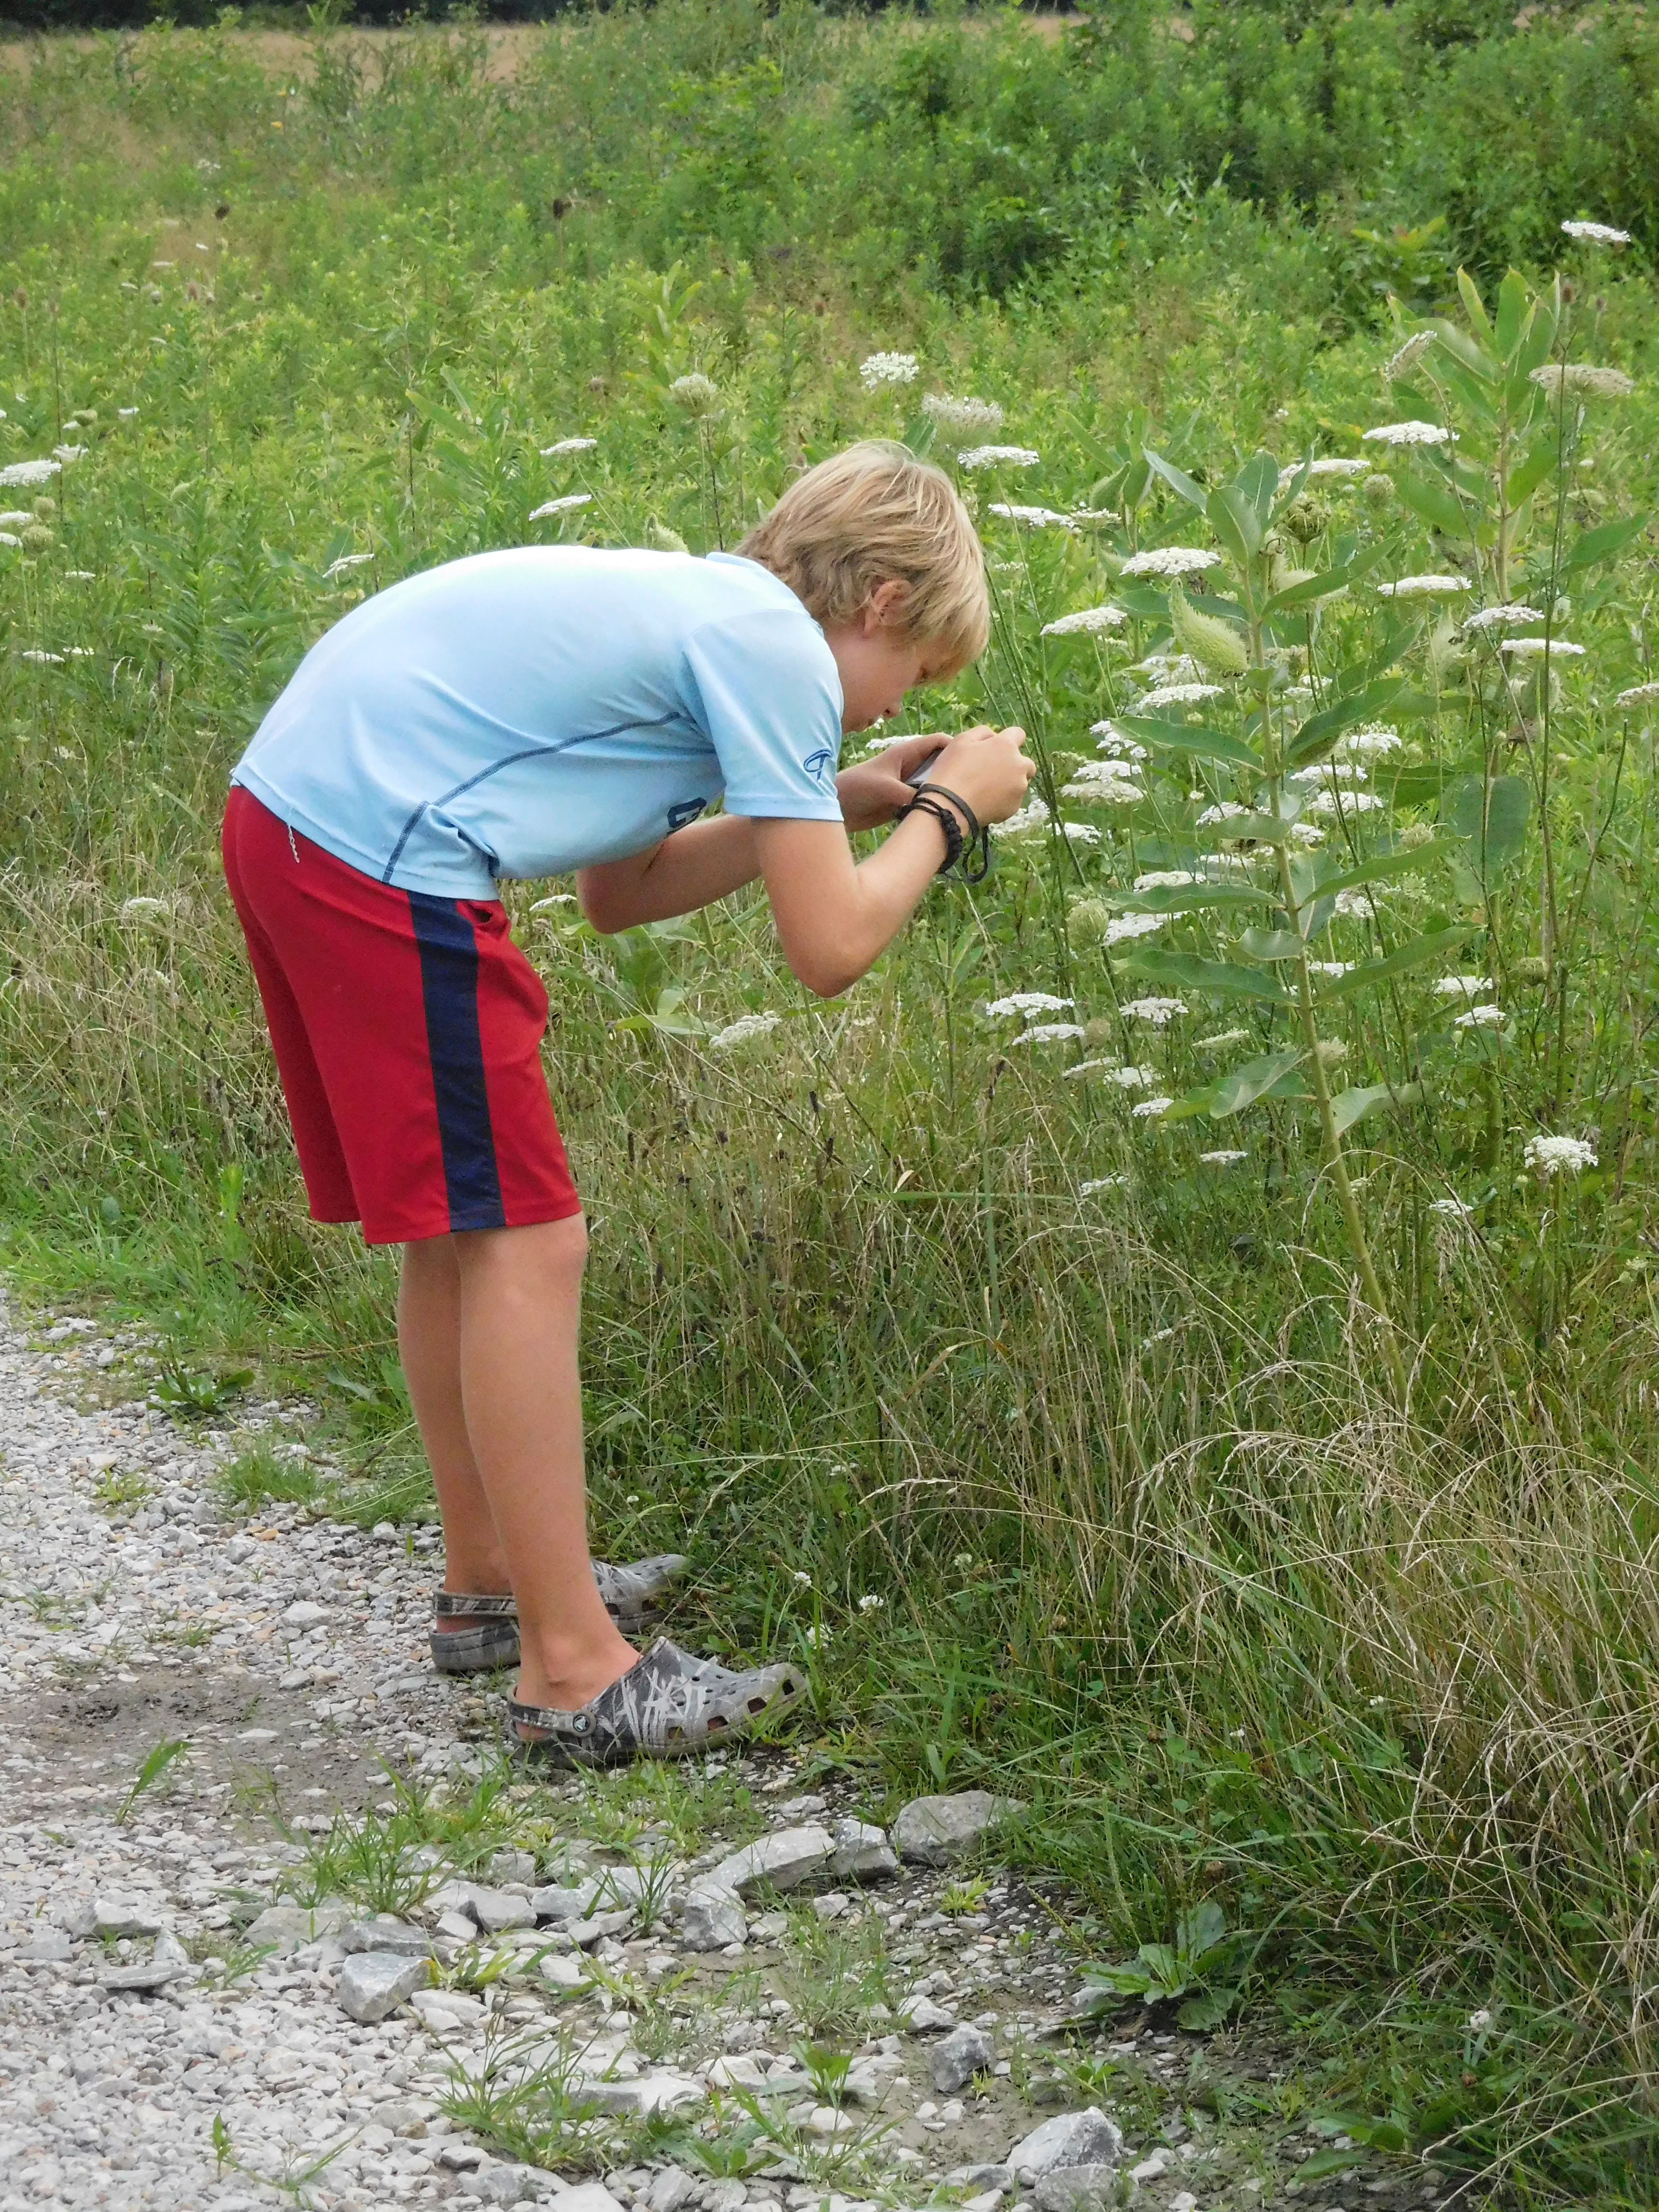 A boy bends over plants to take a photo